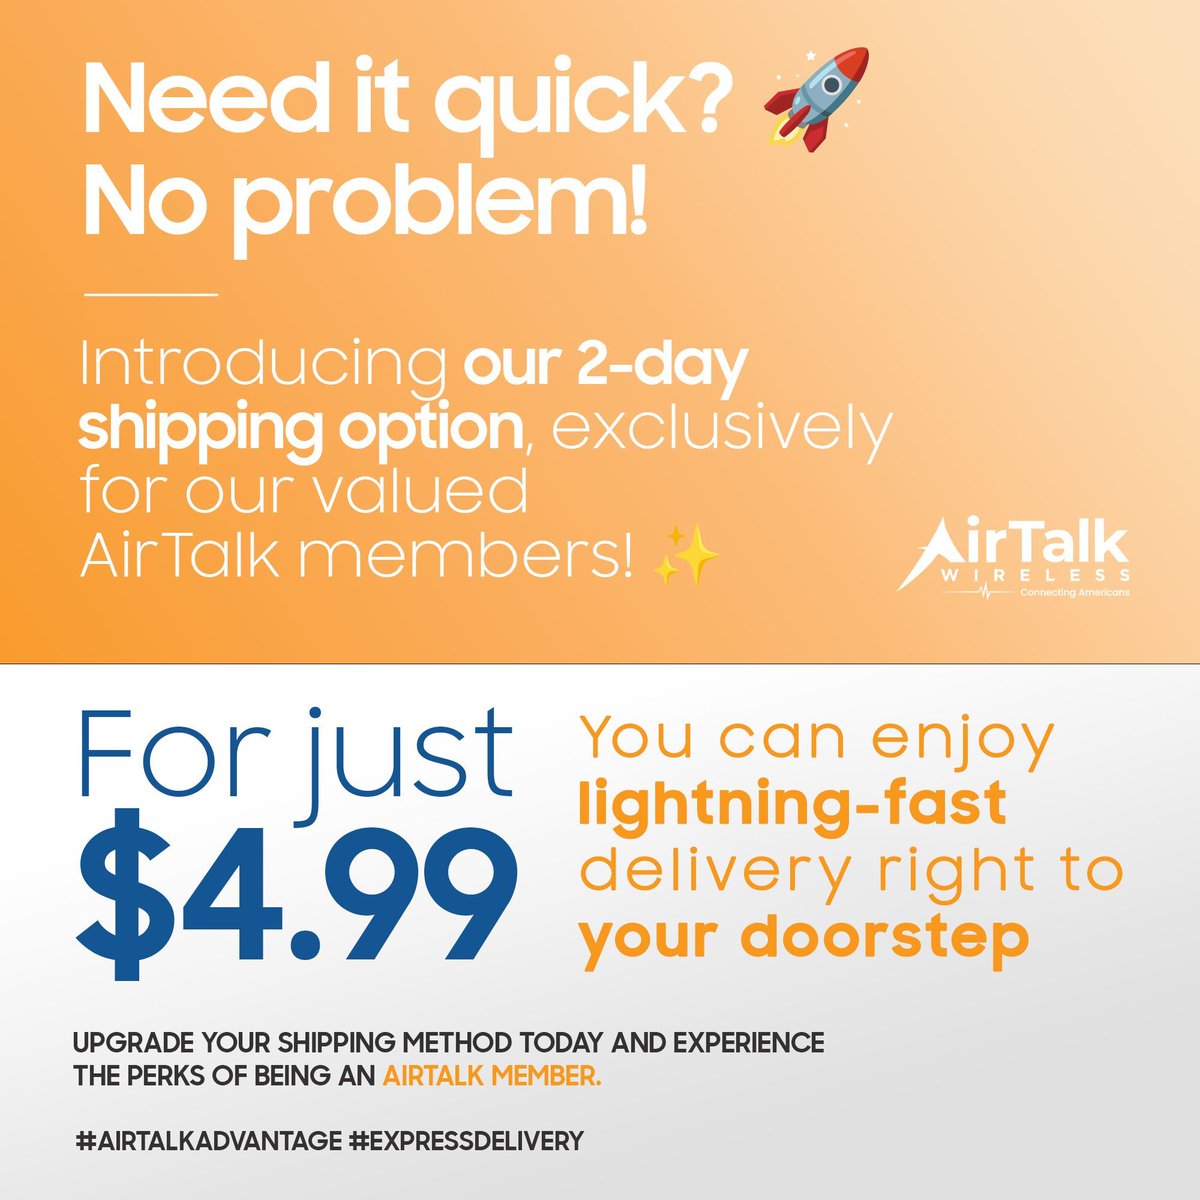 Need it quick? 🚀 No problem!
Introducing our 2-day shipping option, exclusively for our valued AirTalk members! ✨ 
For just $4.99, you can enjoy our lightning-fast delivery right to your doorstep. 
Upgrade your shipping method today and experience the perks of AirTalk.